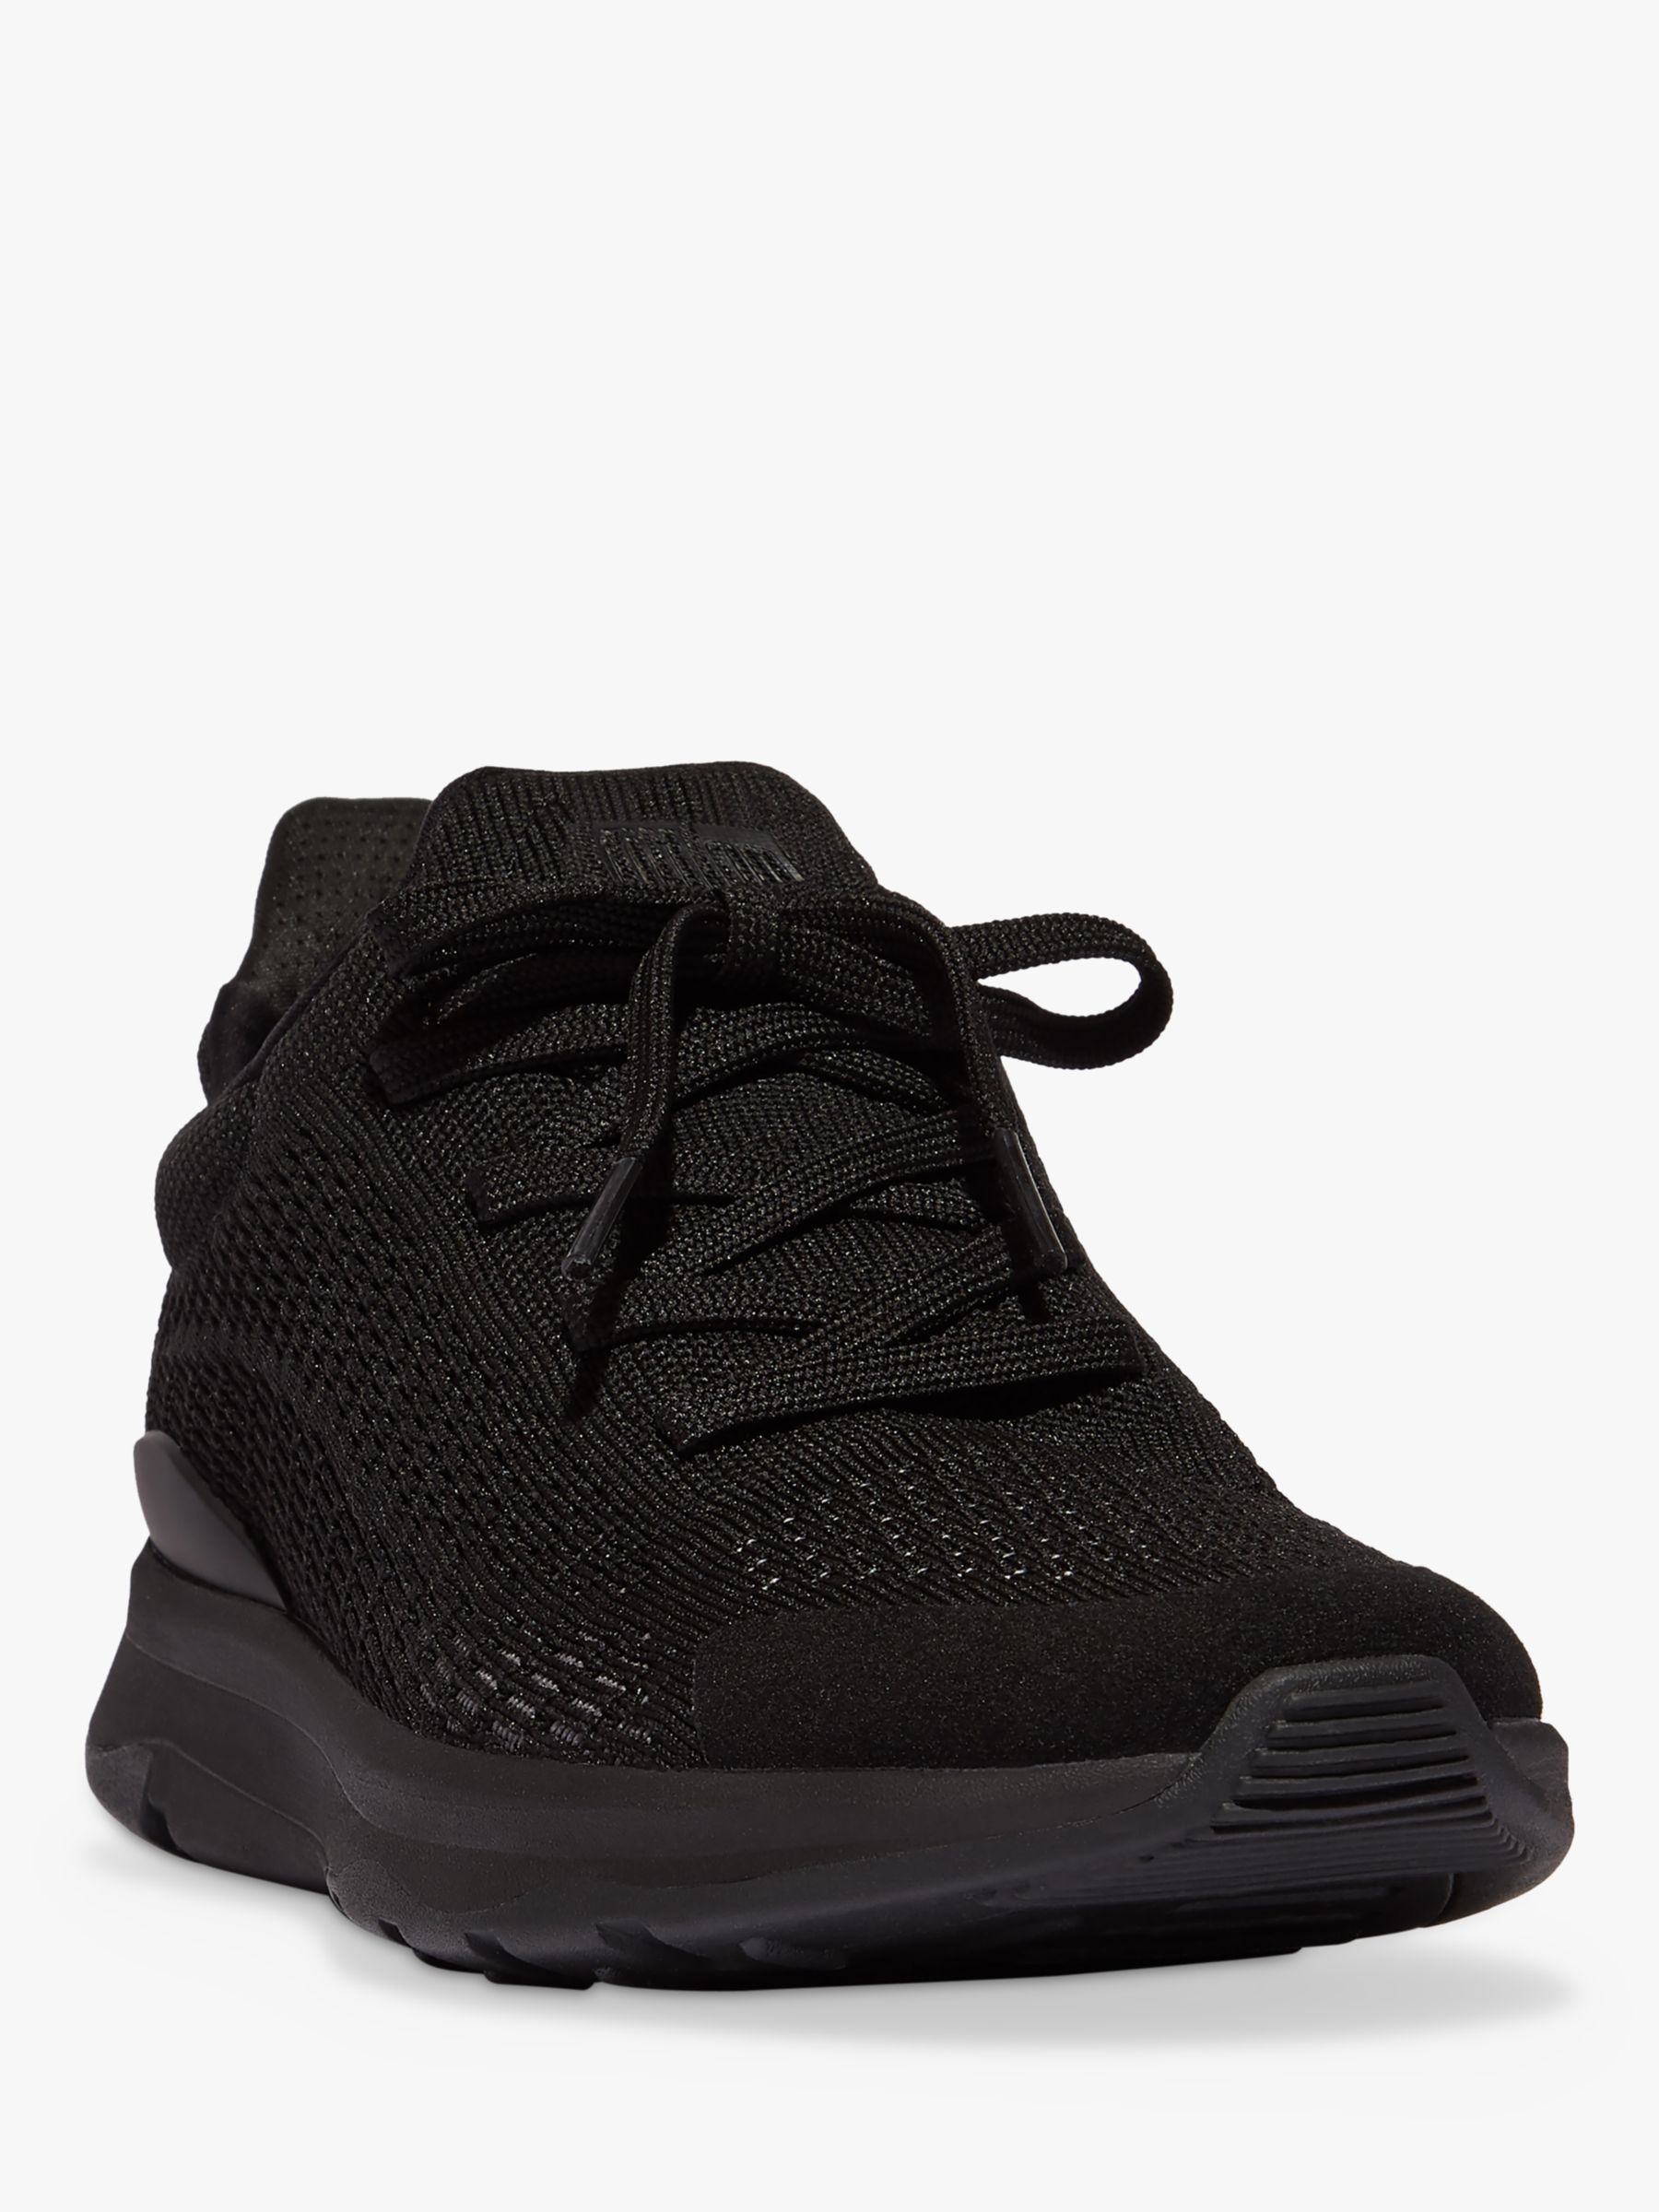 FitFlop Vitmain Knitted Trainers, Black, 3